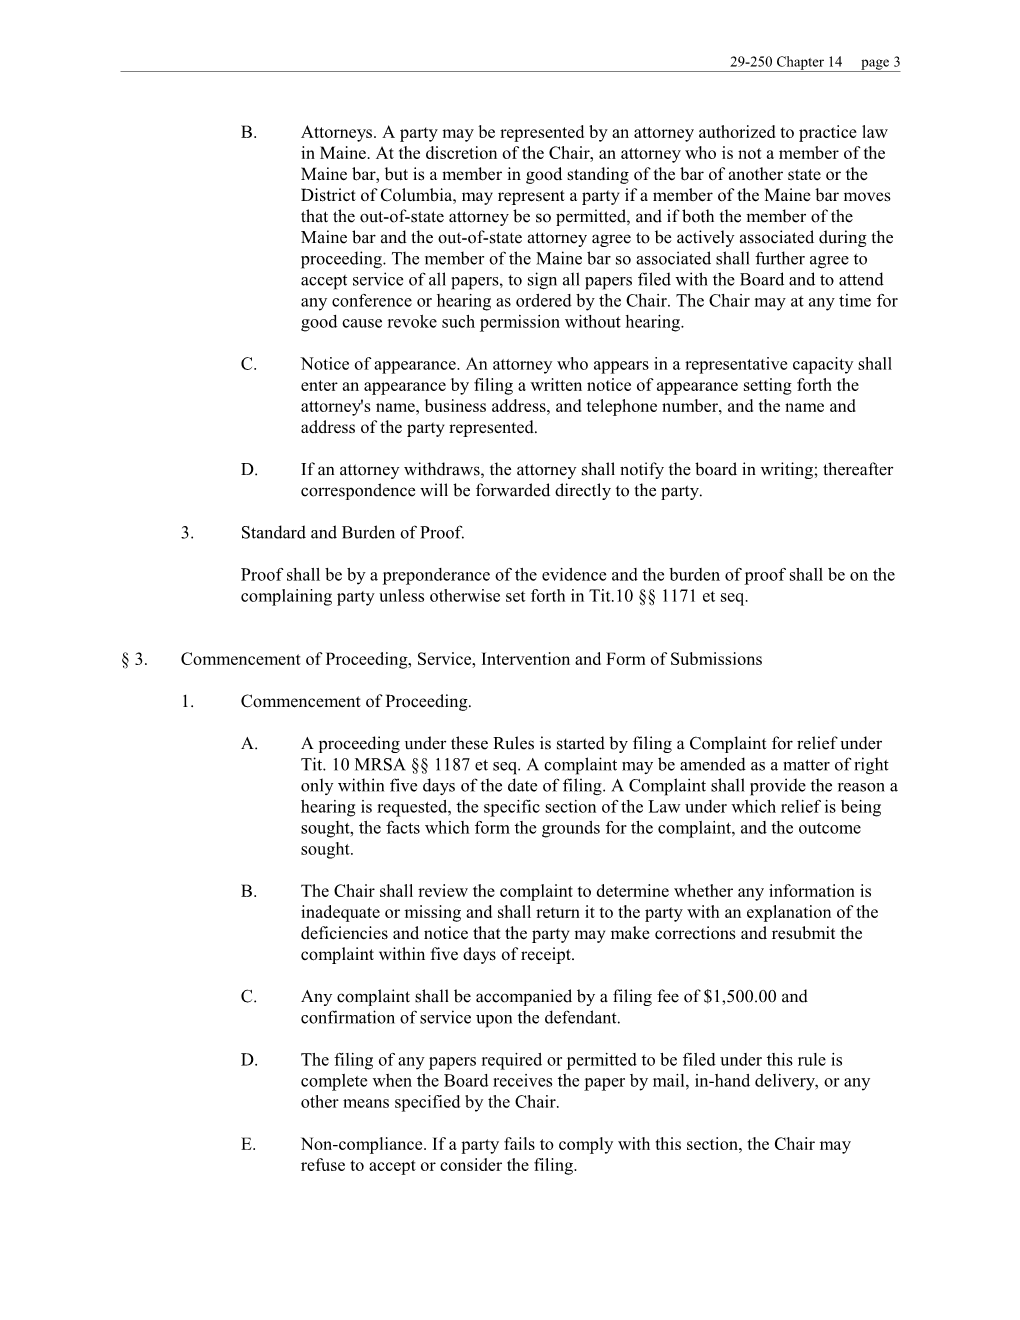 Chapter 14:RULES for the MAINE MOTOR VEHICLE FRANCHISE BOARD